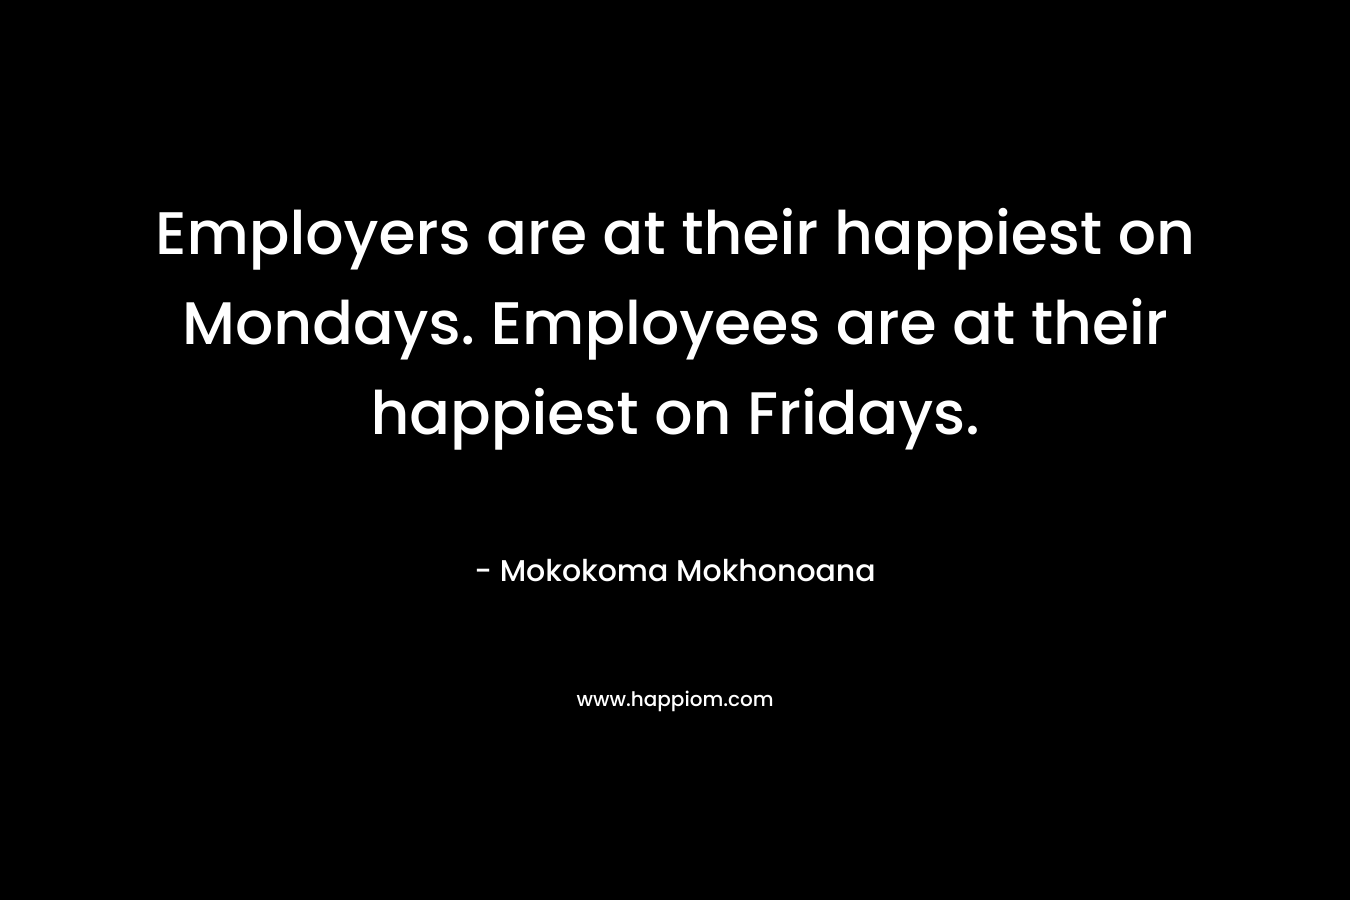 Employers are at their happiest on Mondays. Employees are at their happiest on Fridays.